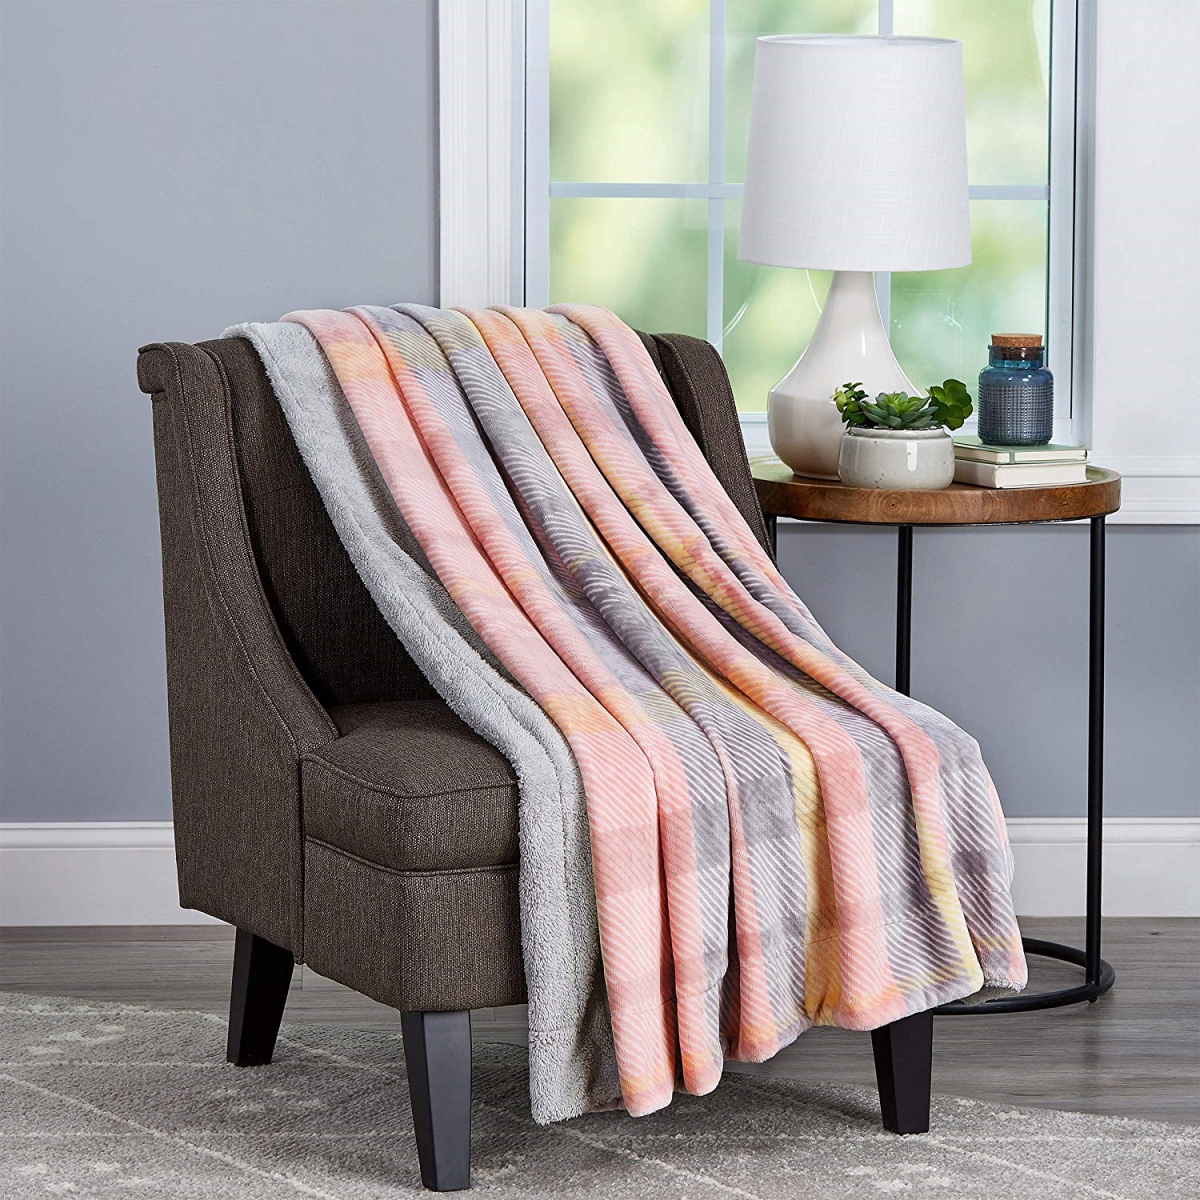 66a-29331 Lavish Home Collection Blanket Oversized Plush Woven Polyester Sherpa Fleece Plaid Throw